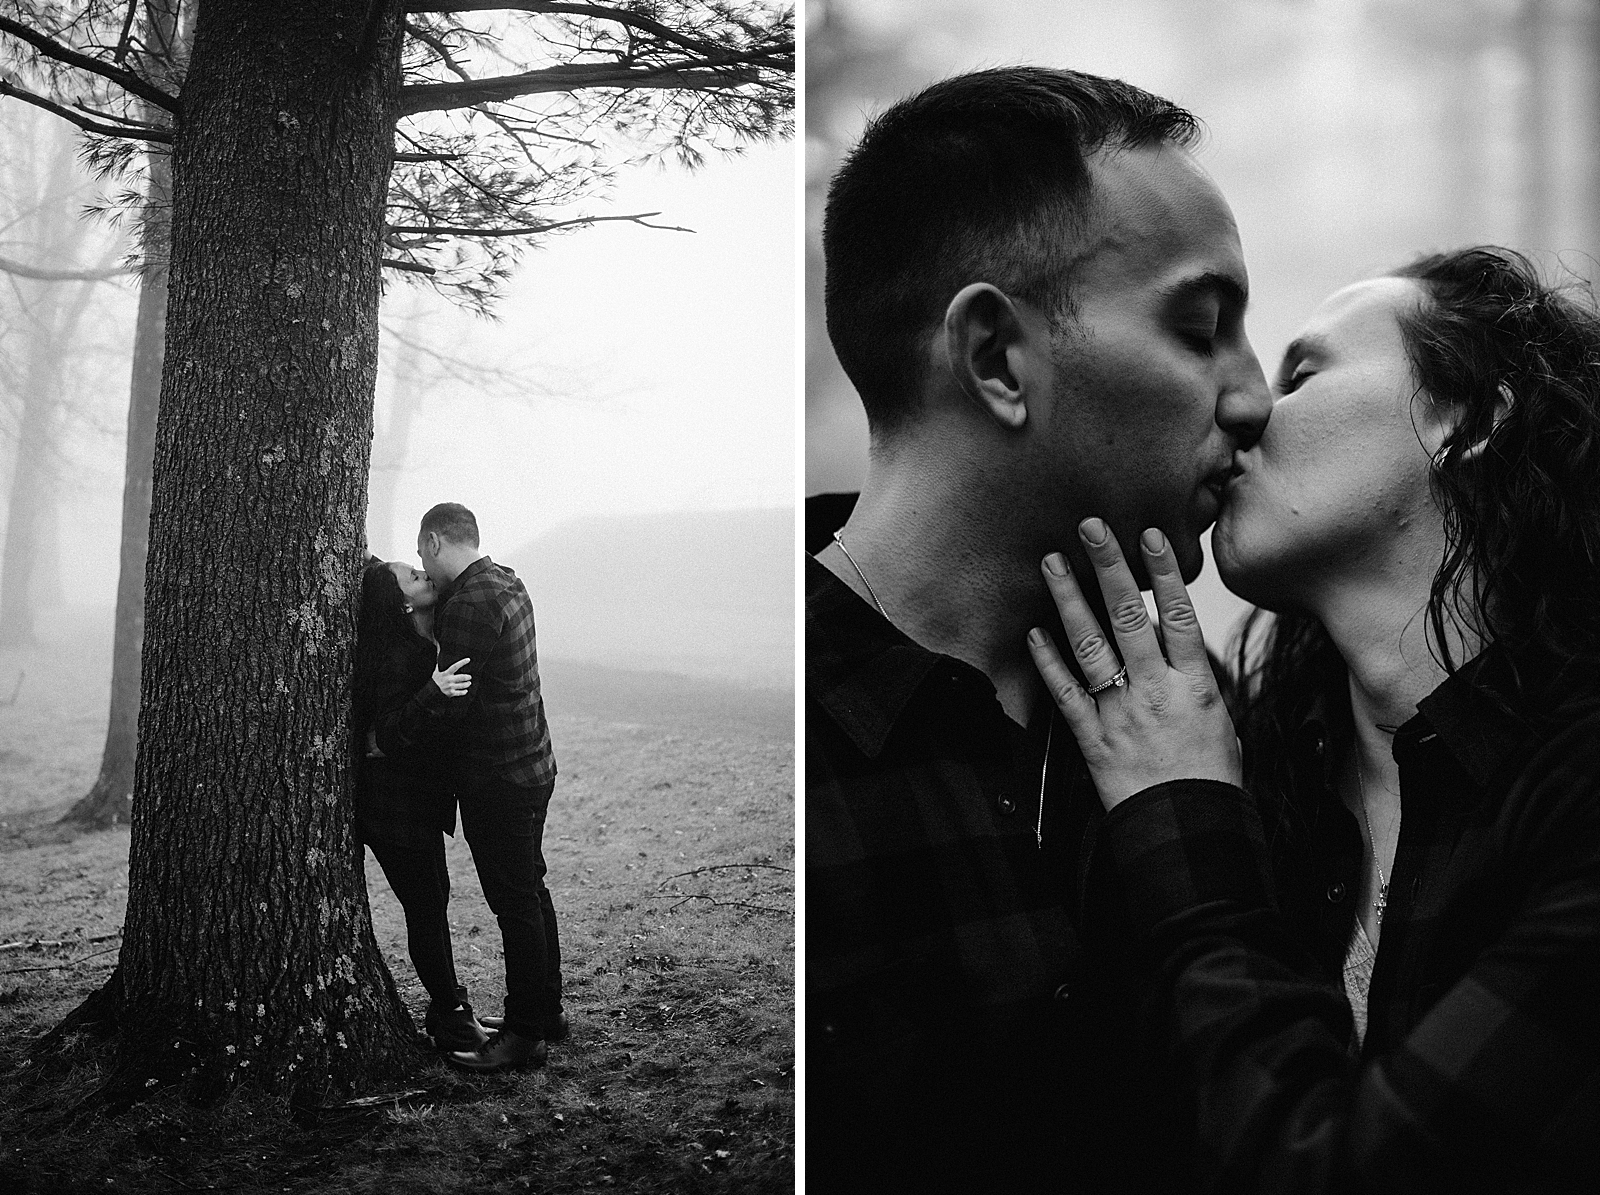 B&W Couple leaning on tree in misty forest